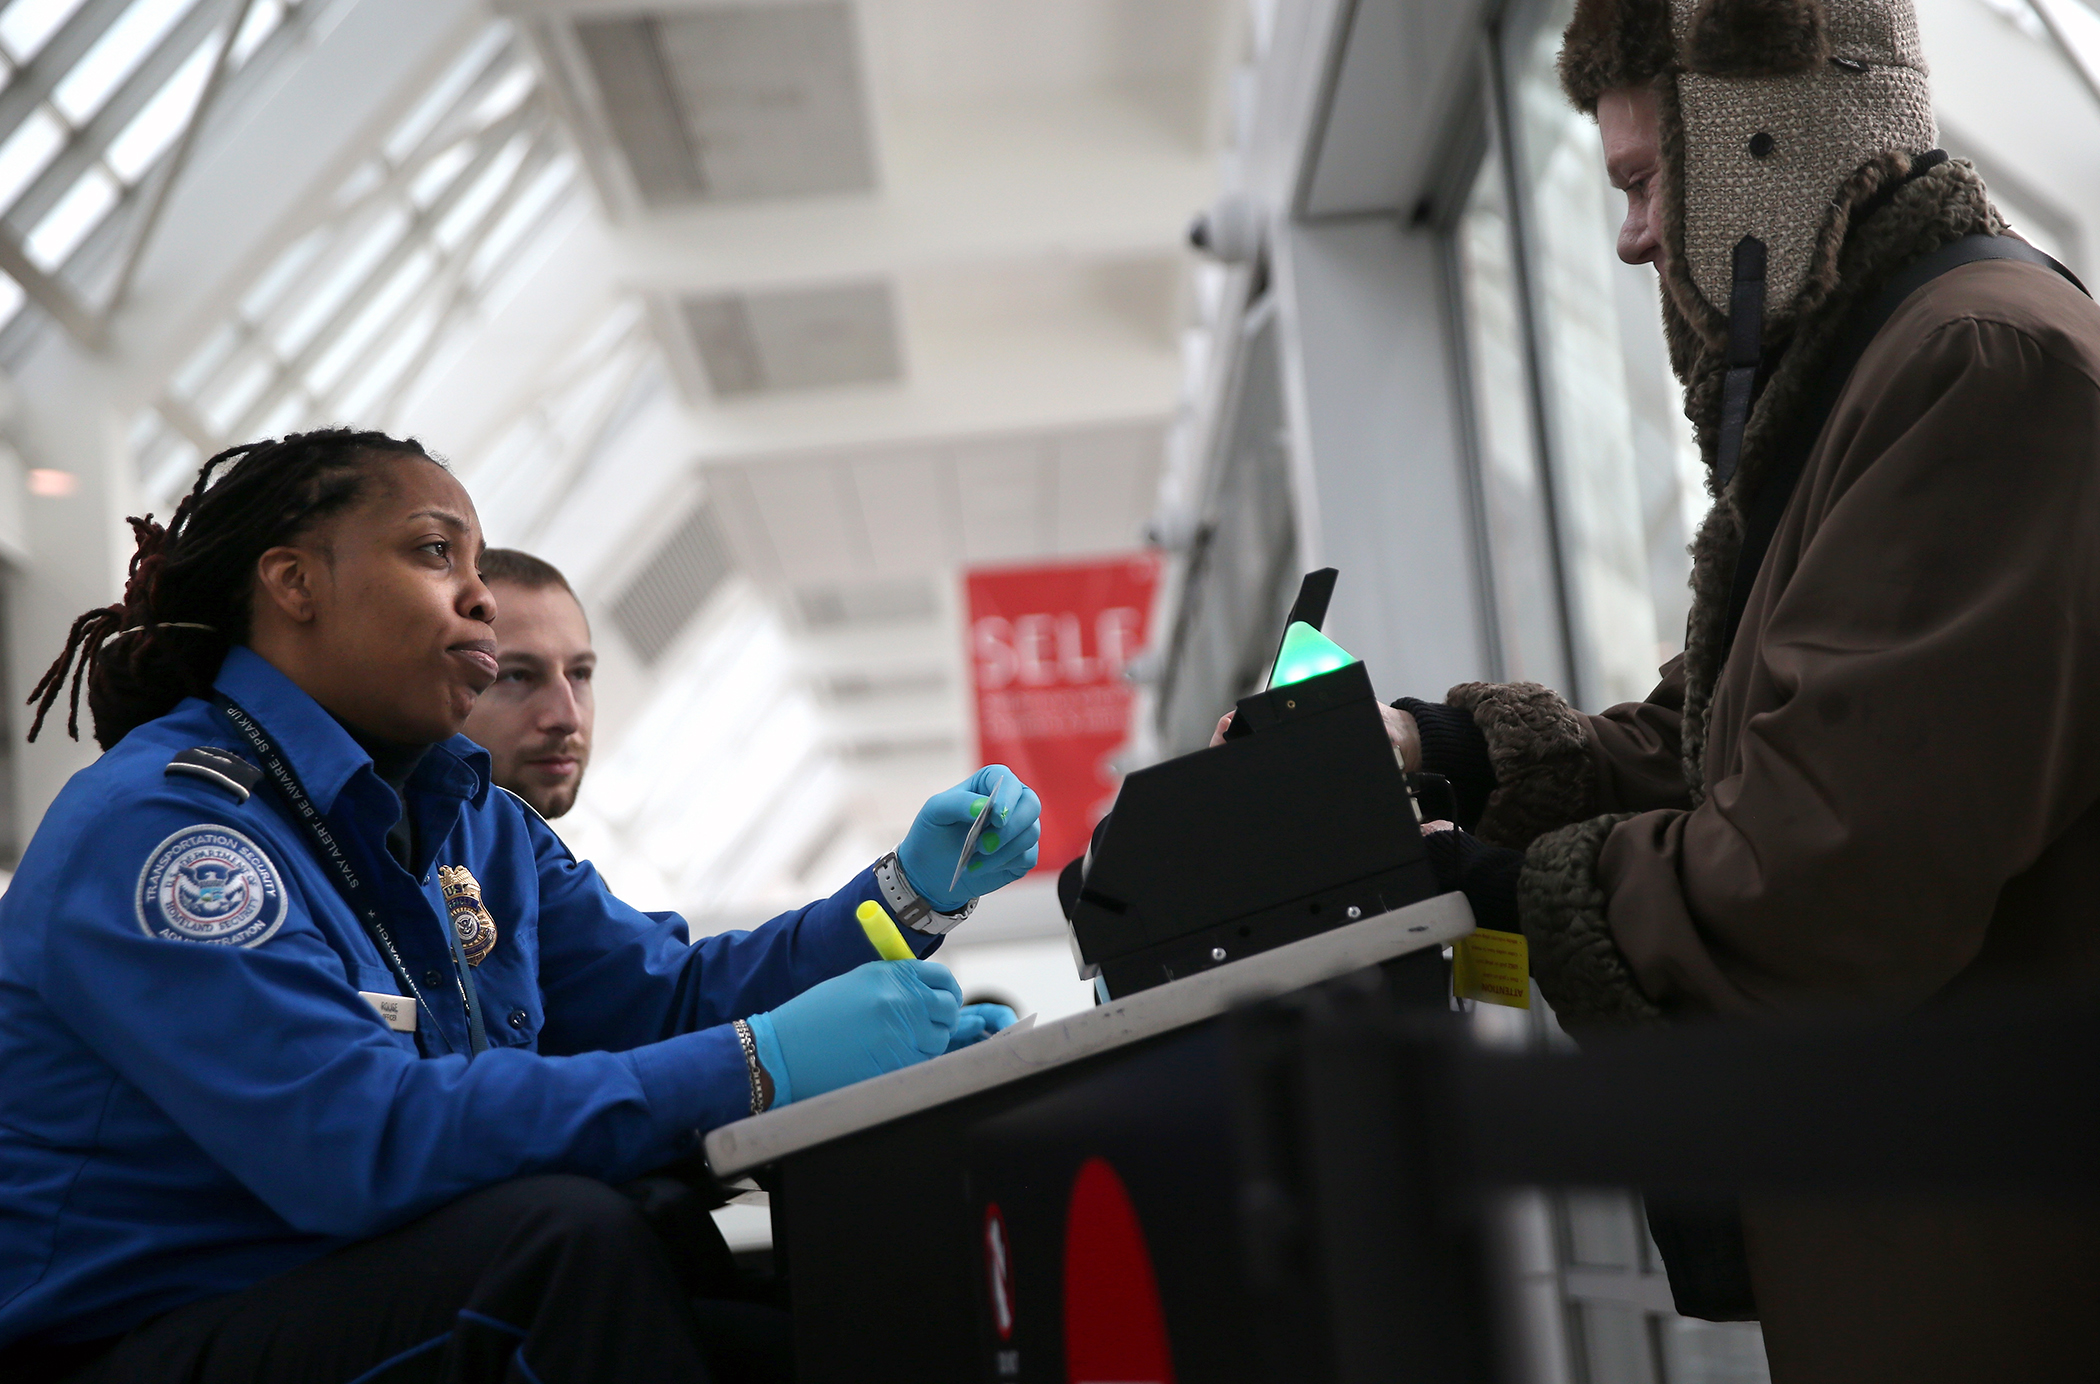 A Driver's License Won't Get You Through Airport Security If You Live in These States